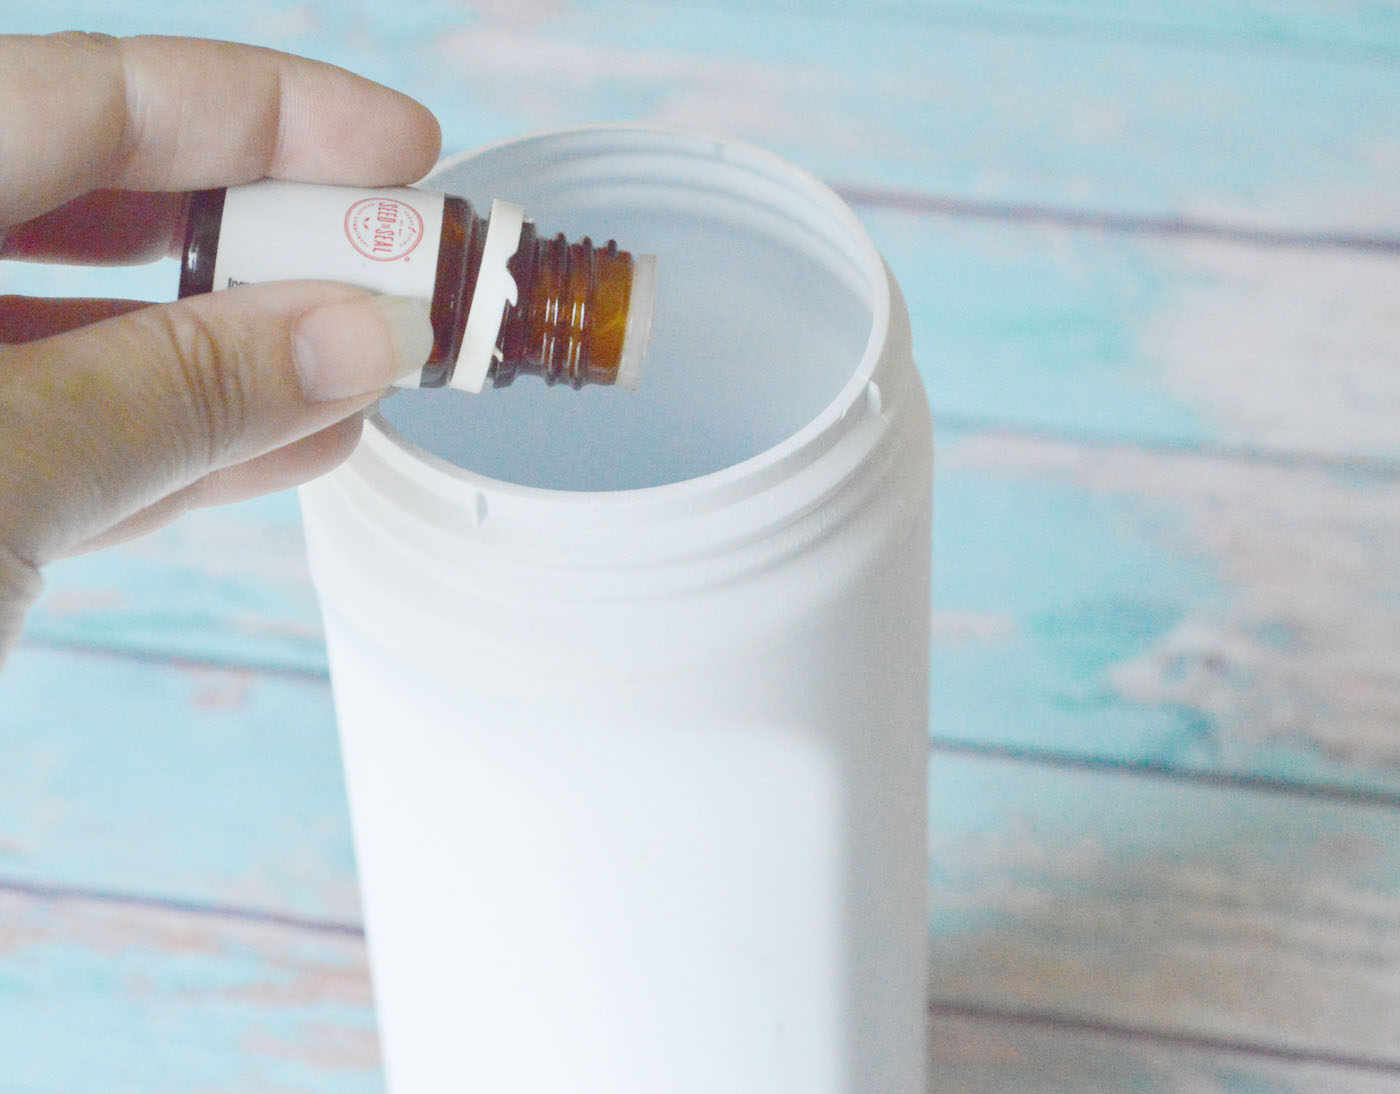 Putting essential oil drops in the container with baking soda